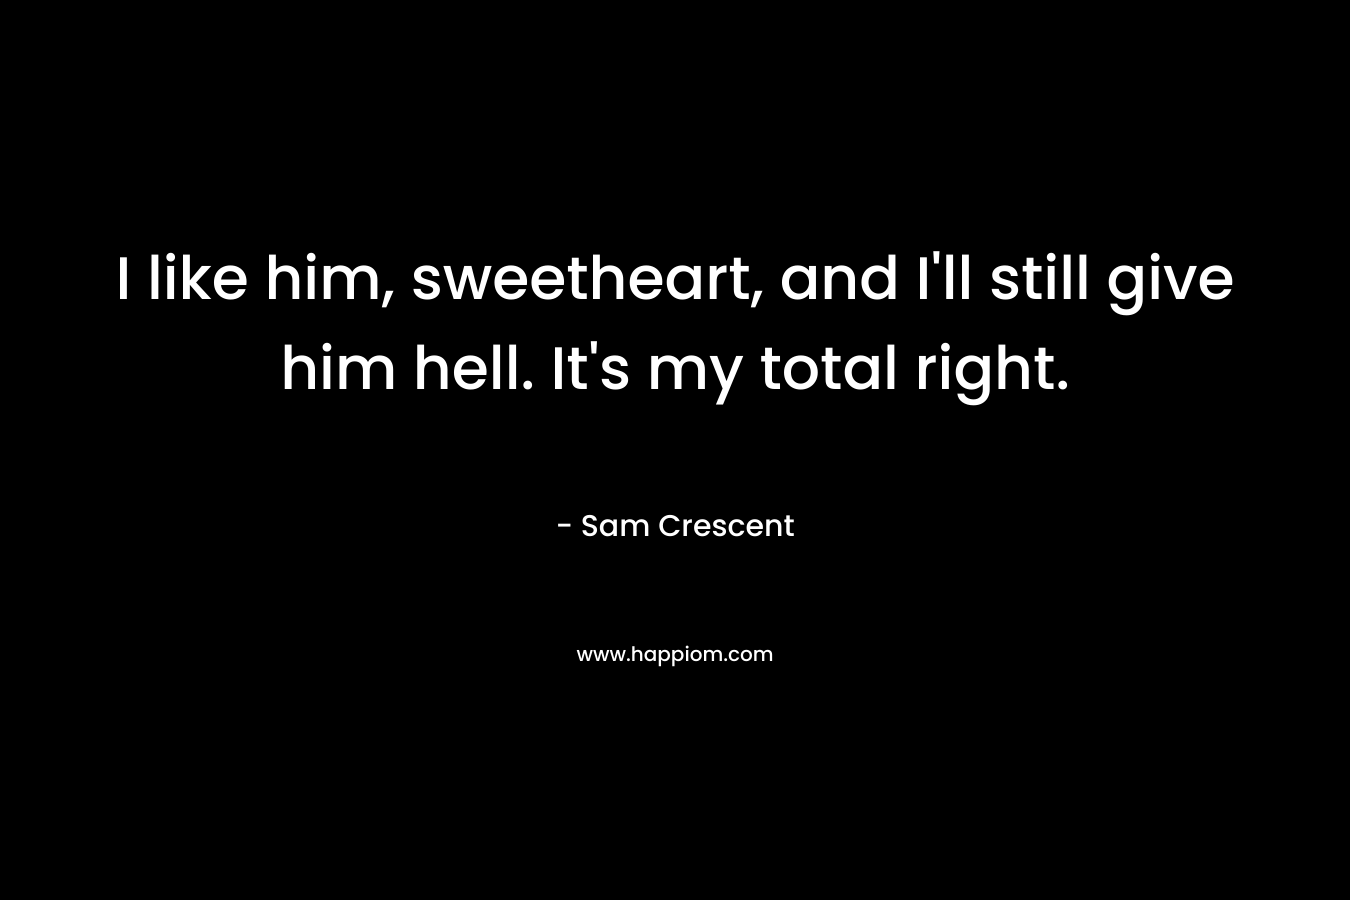 I like him, sweetheart, and I’ll still give him hell. It’s my total right. – Sam Crescent